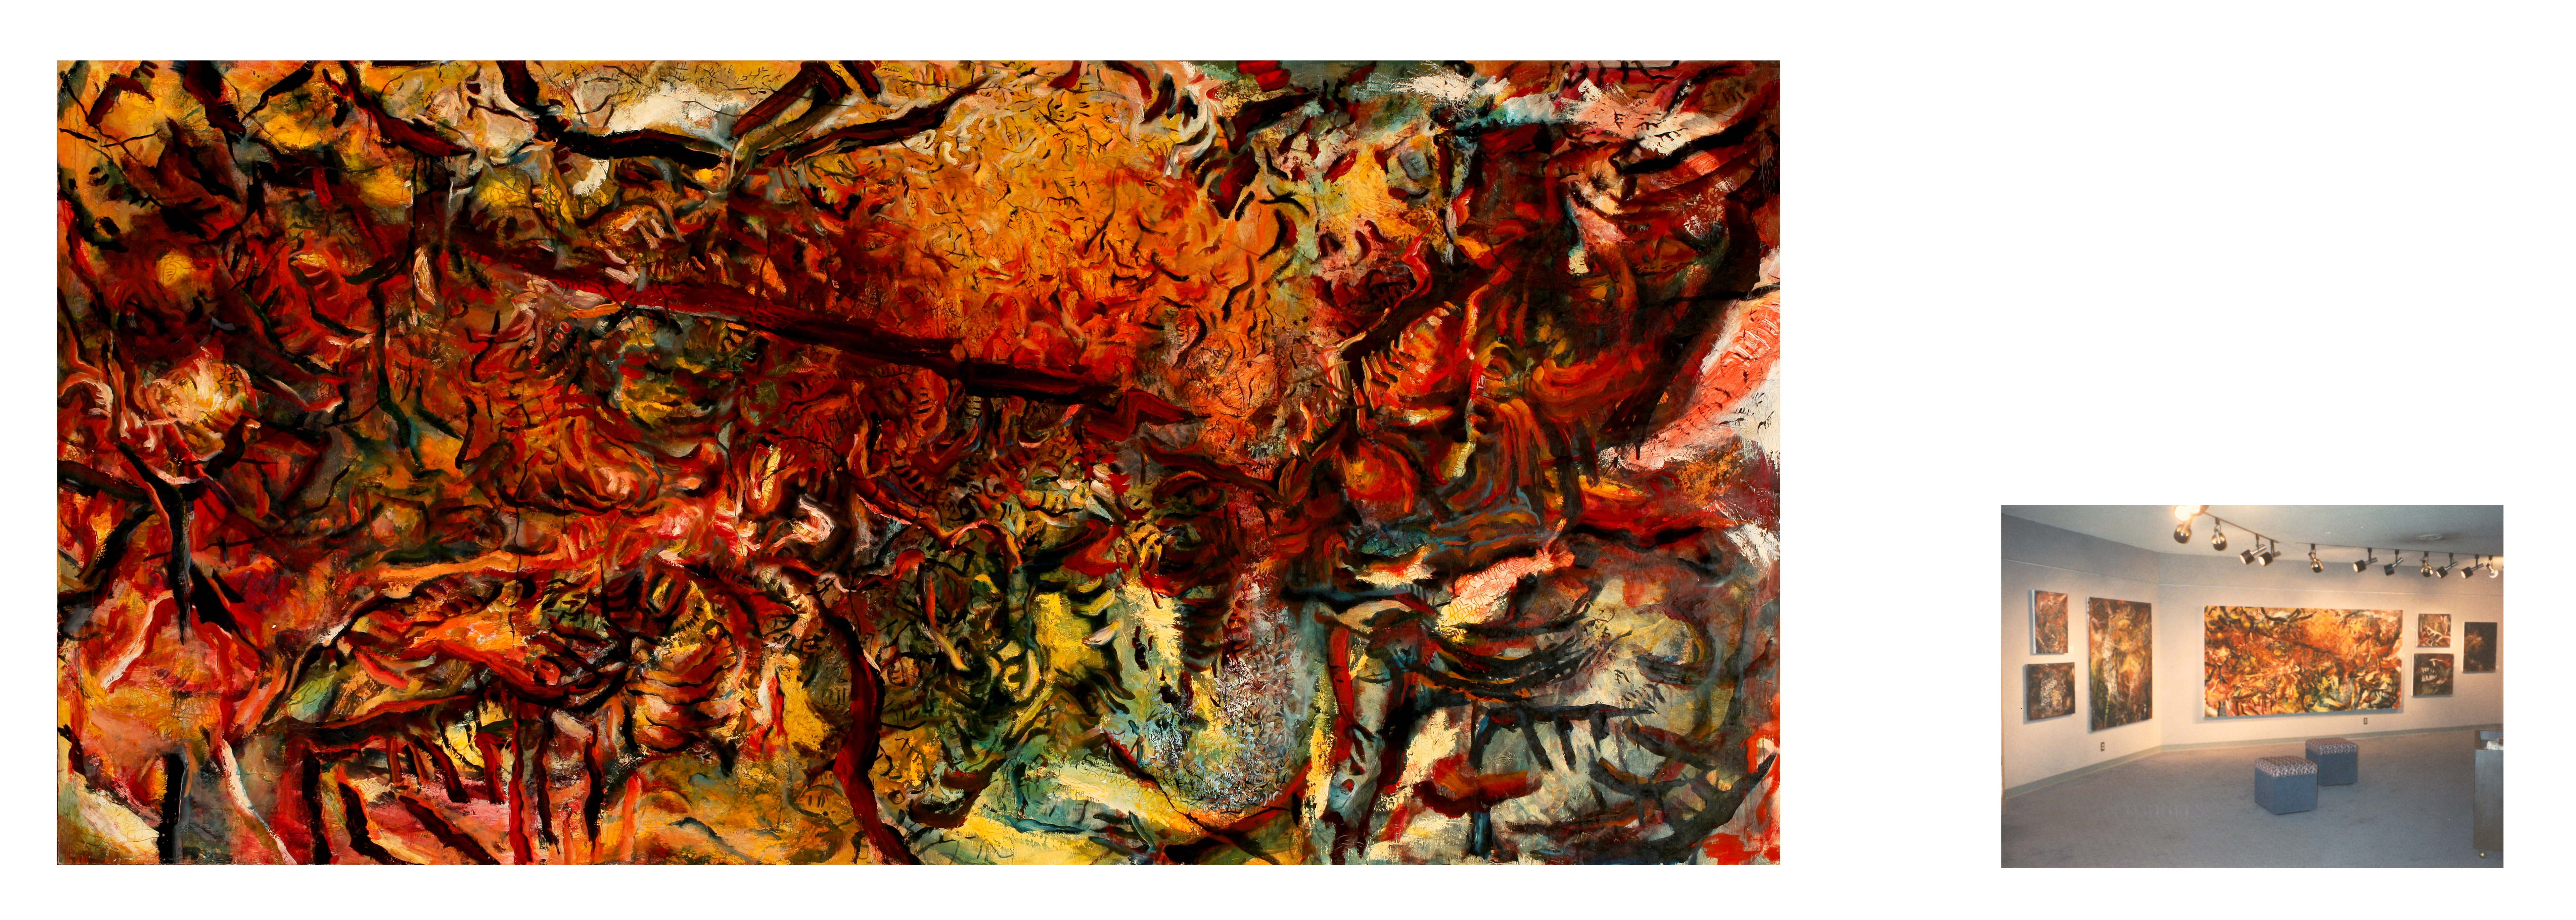 Yellow River Series II, 68 x 144 inches, Oil on Canvas, 1990